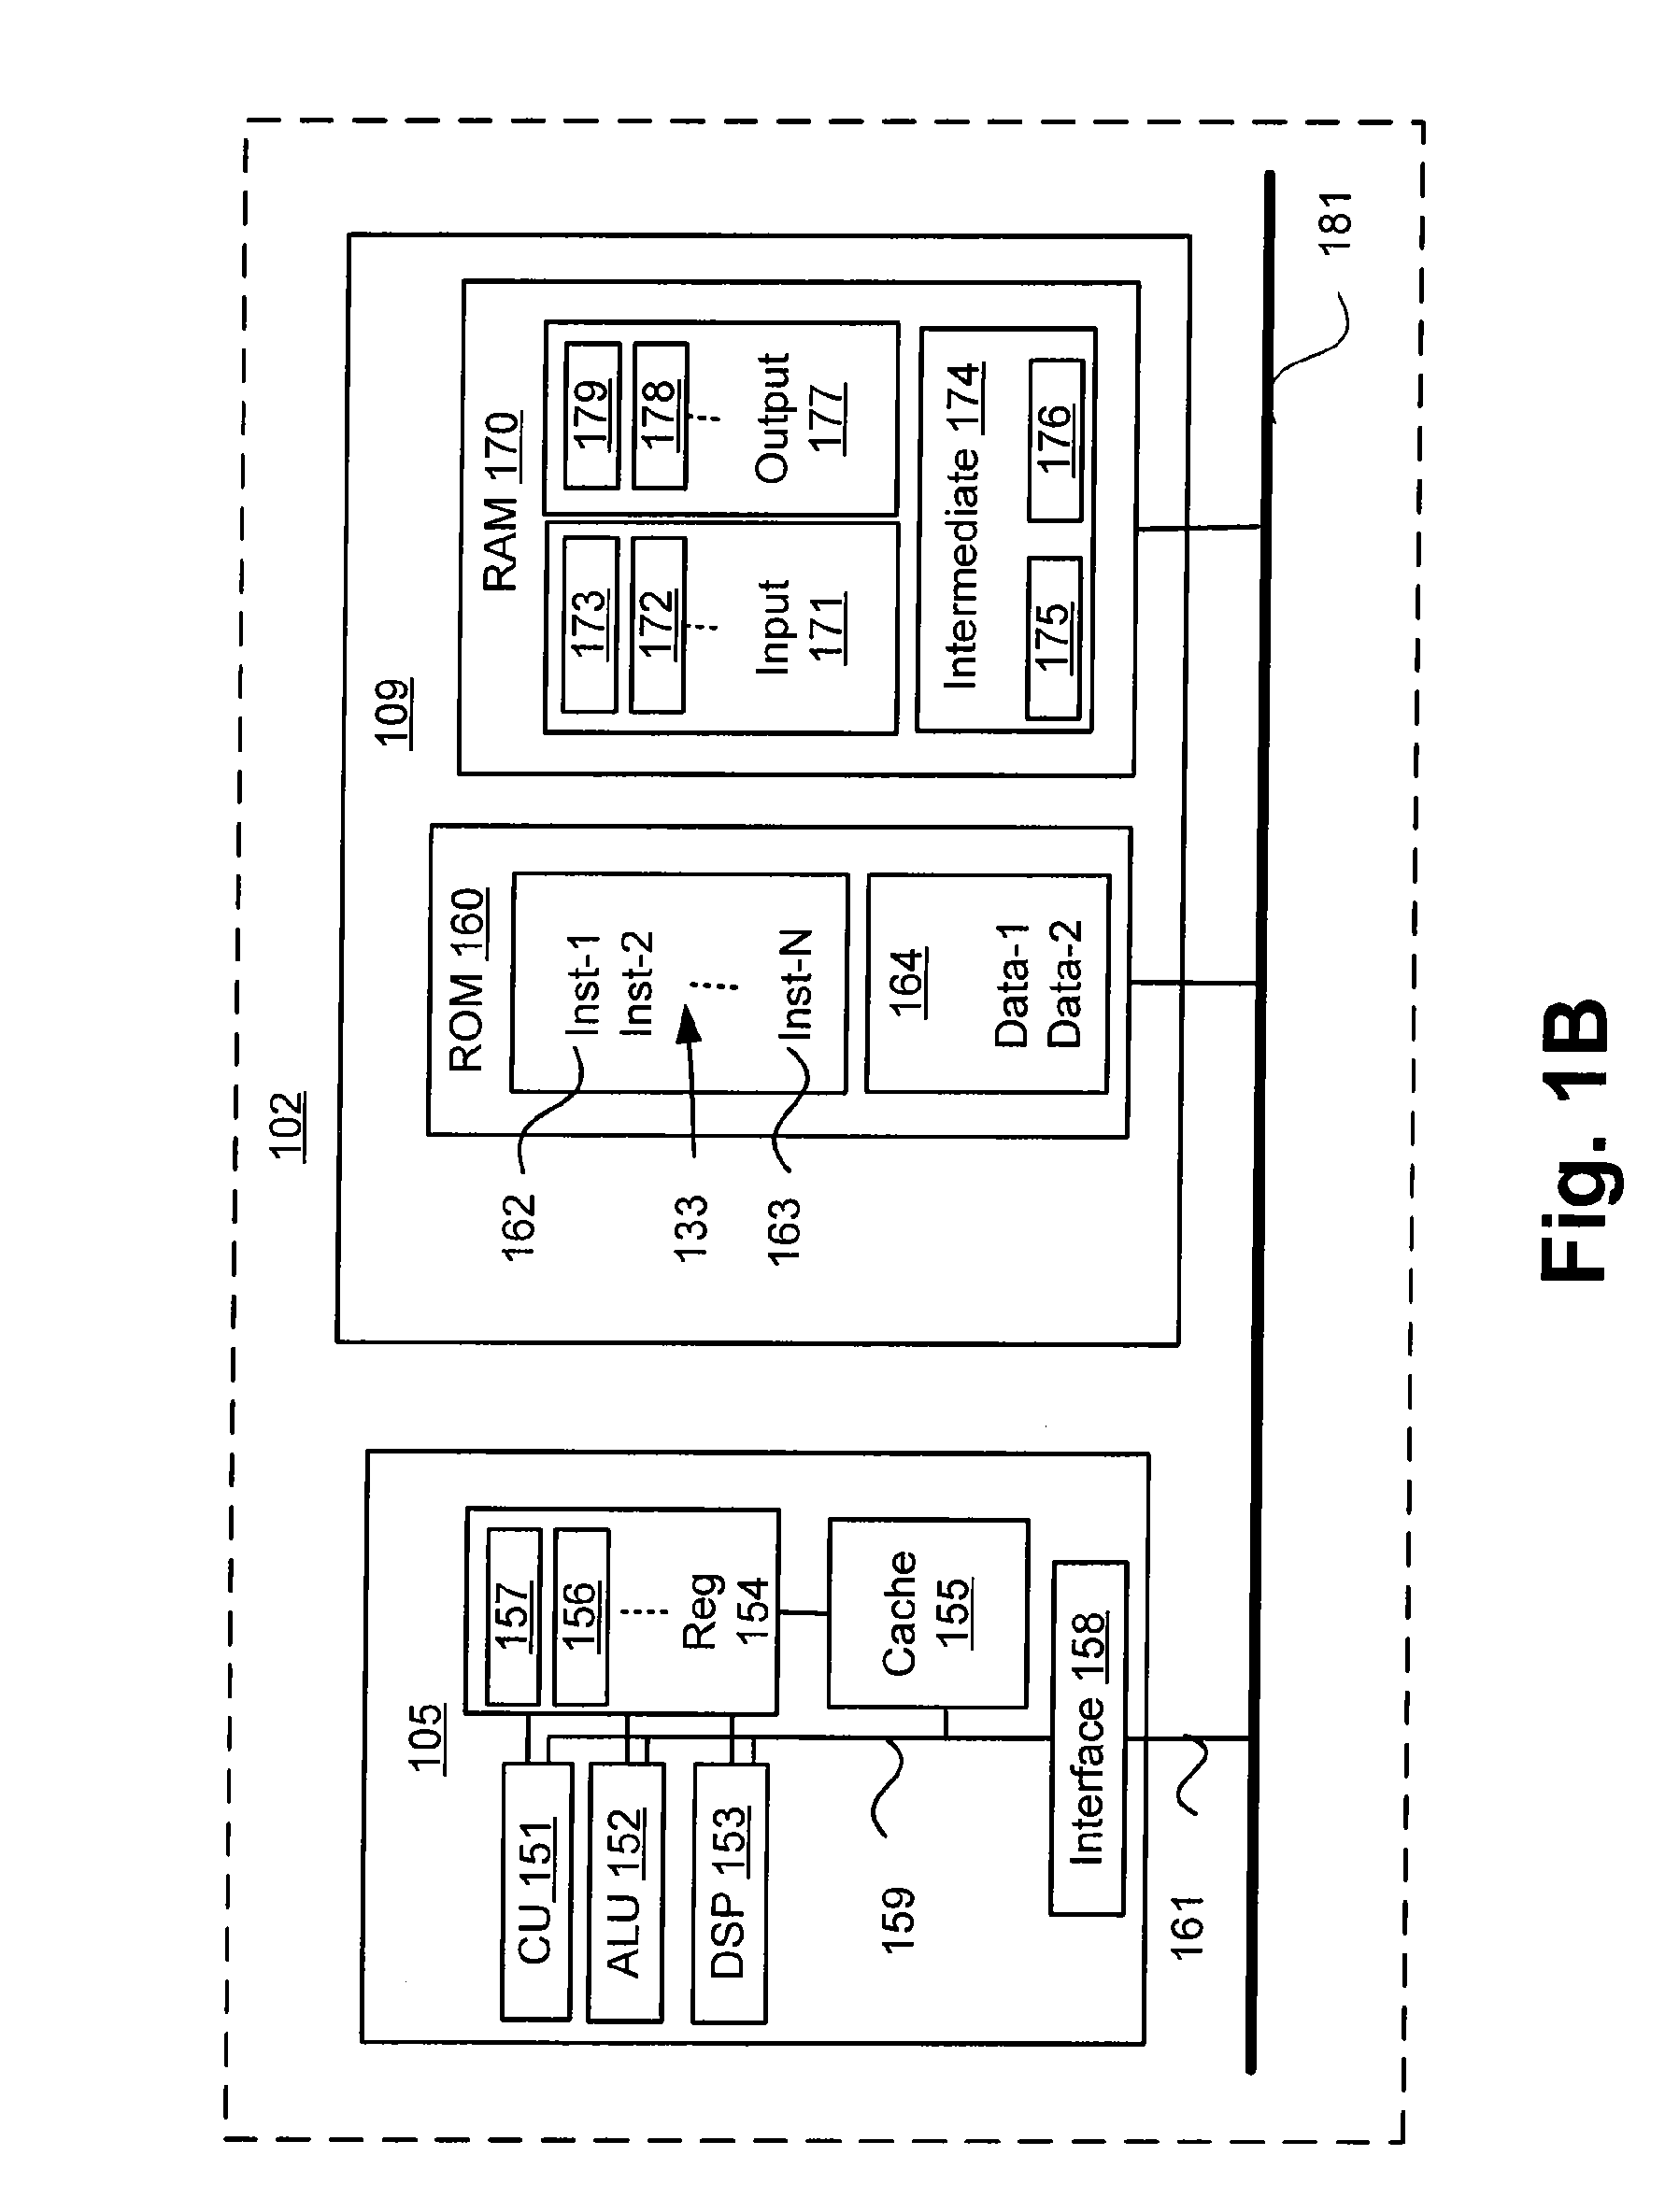 Method, apparatus and system for detecting a supporting surface region in an image